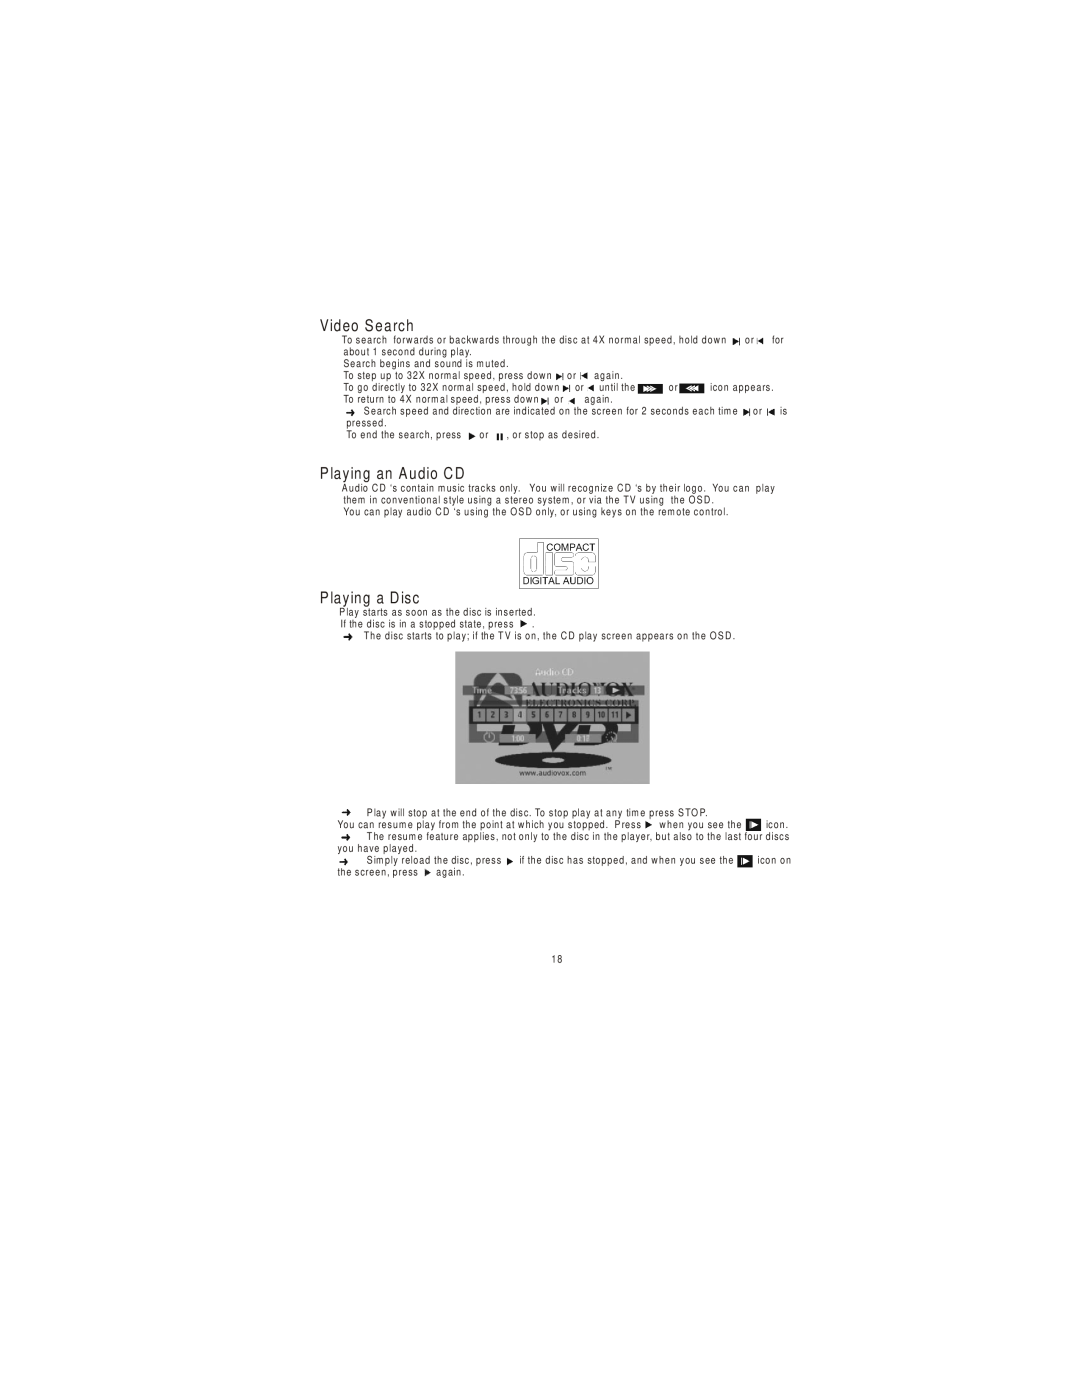 Audiovox 3200 owner manual Video Search, Playing an Audio CD, Playing a Disc 